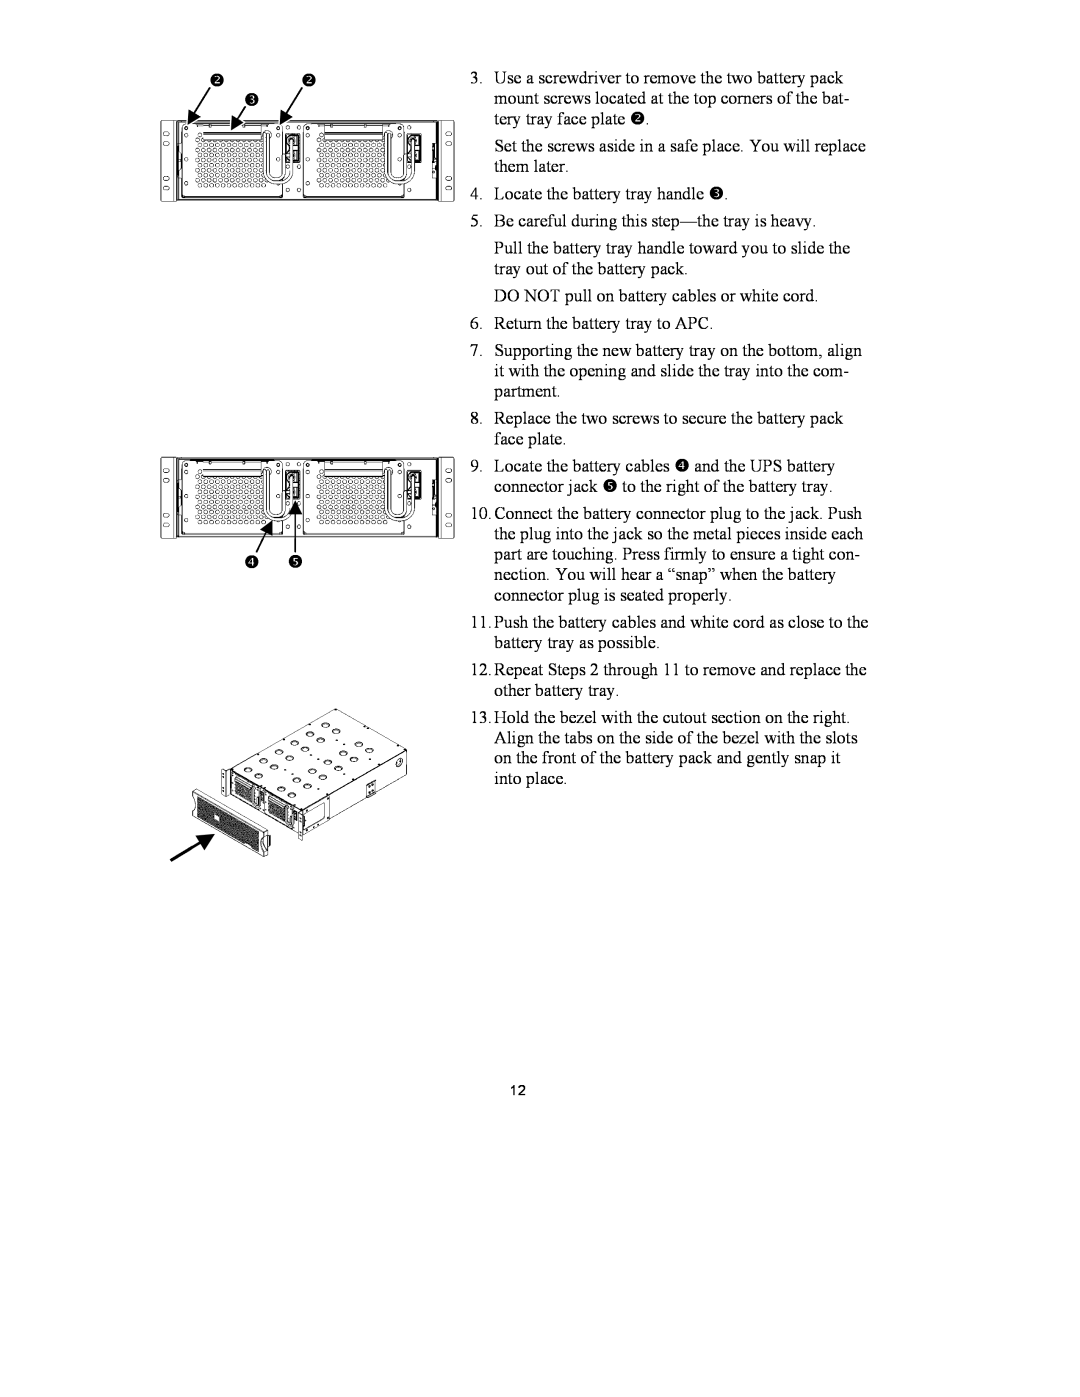 American Power Conversion 3U Rack Mount user manual Set the screws aside in a safe place. You will replace them later 